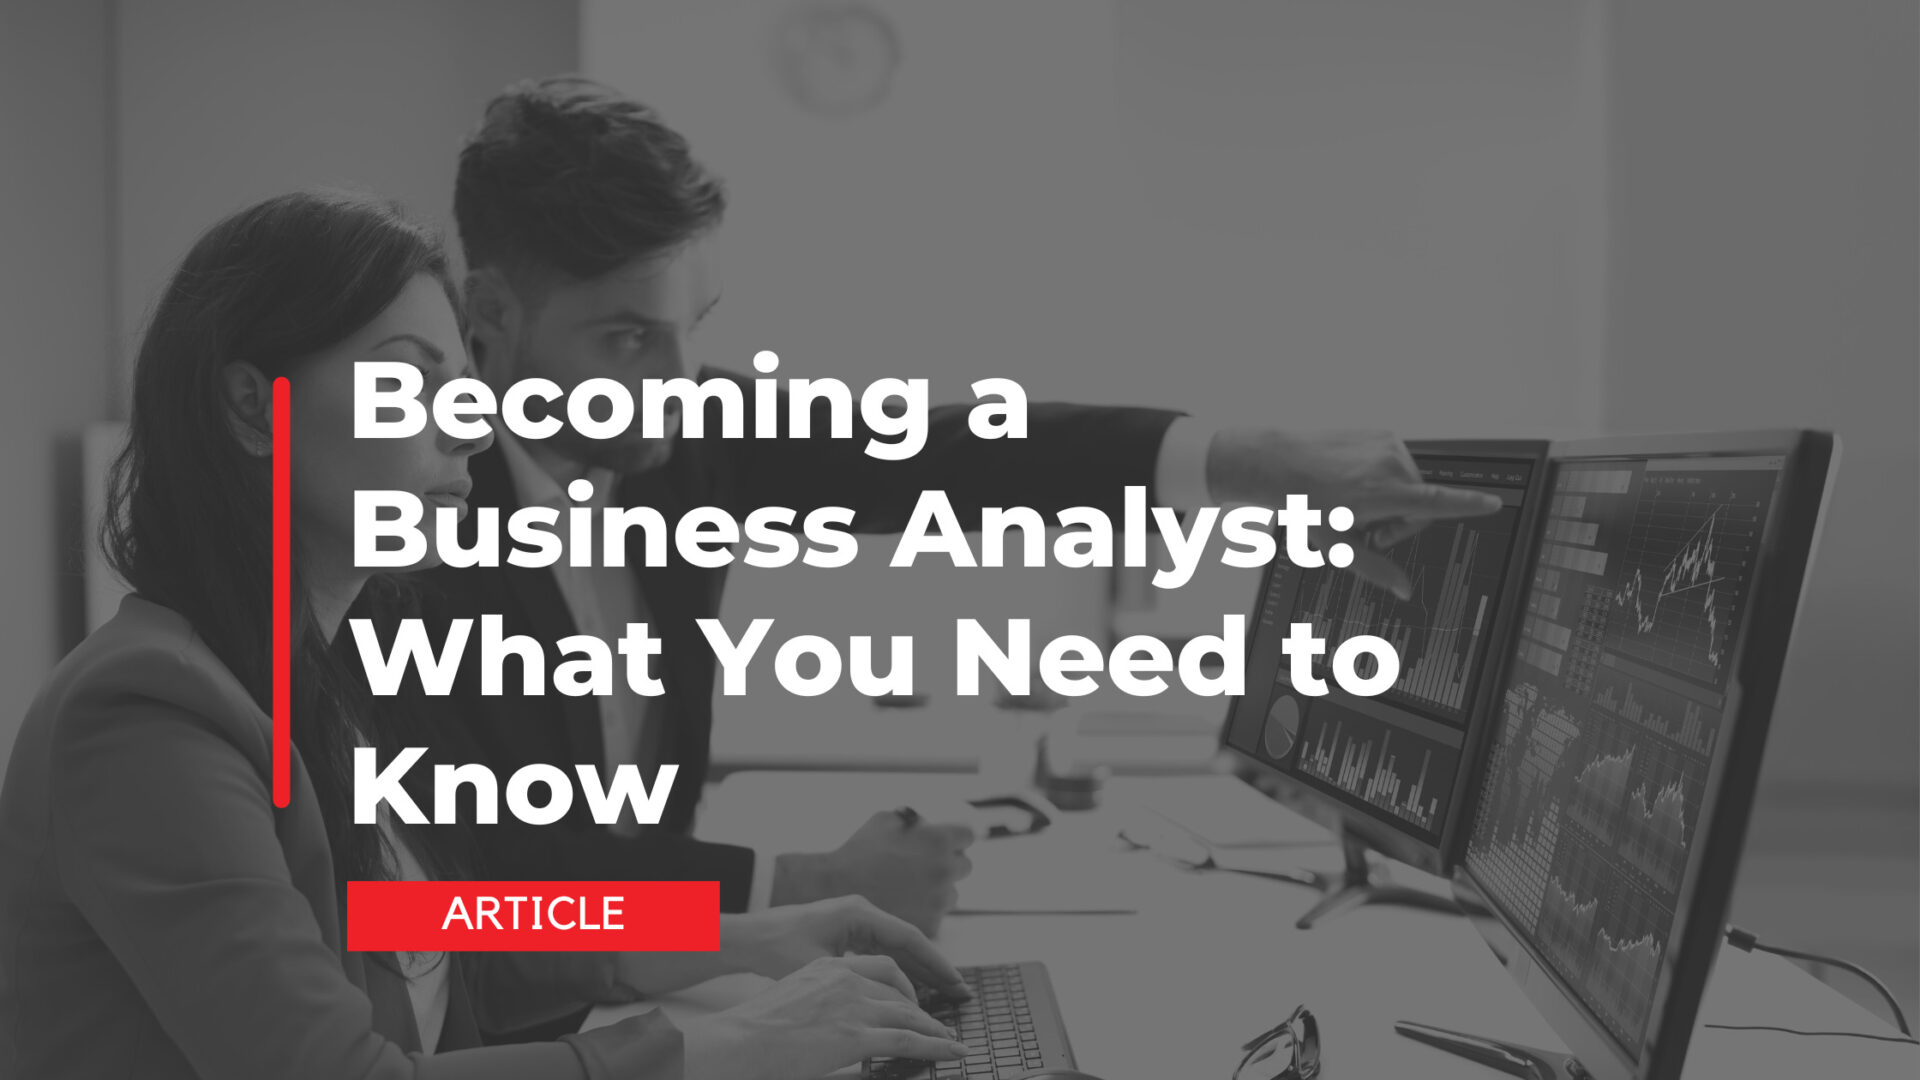 Becoming a Business Analyst: What You Need to Know